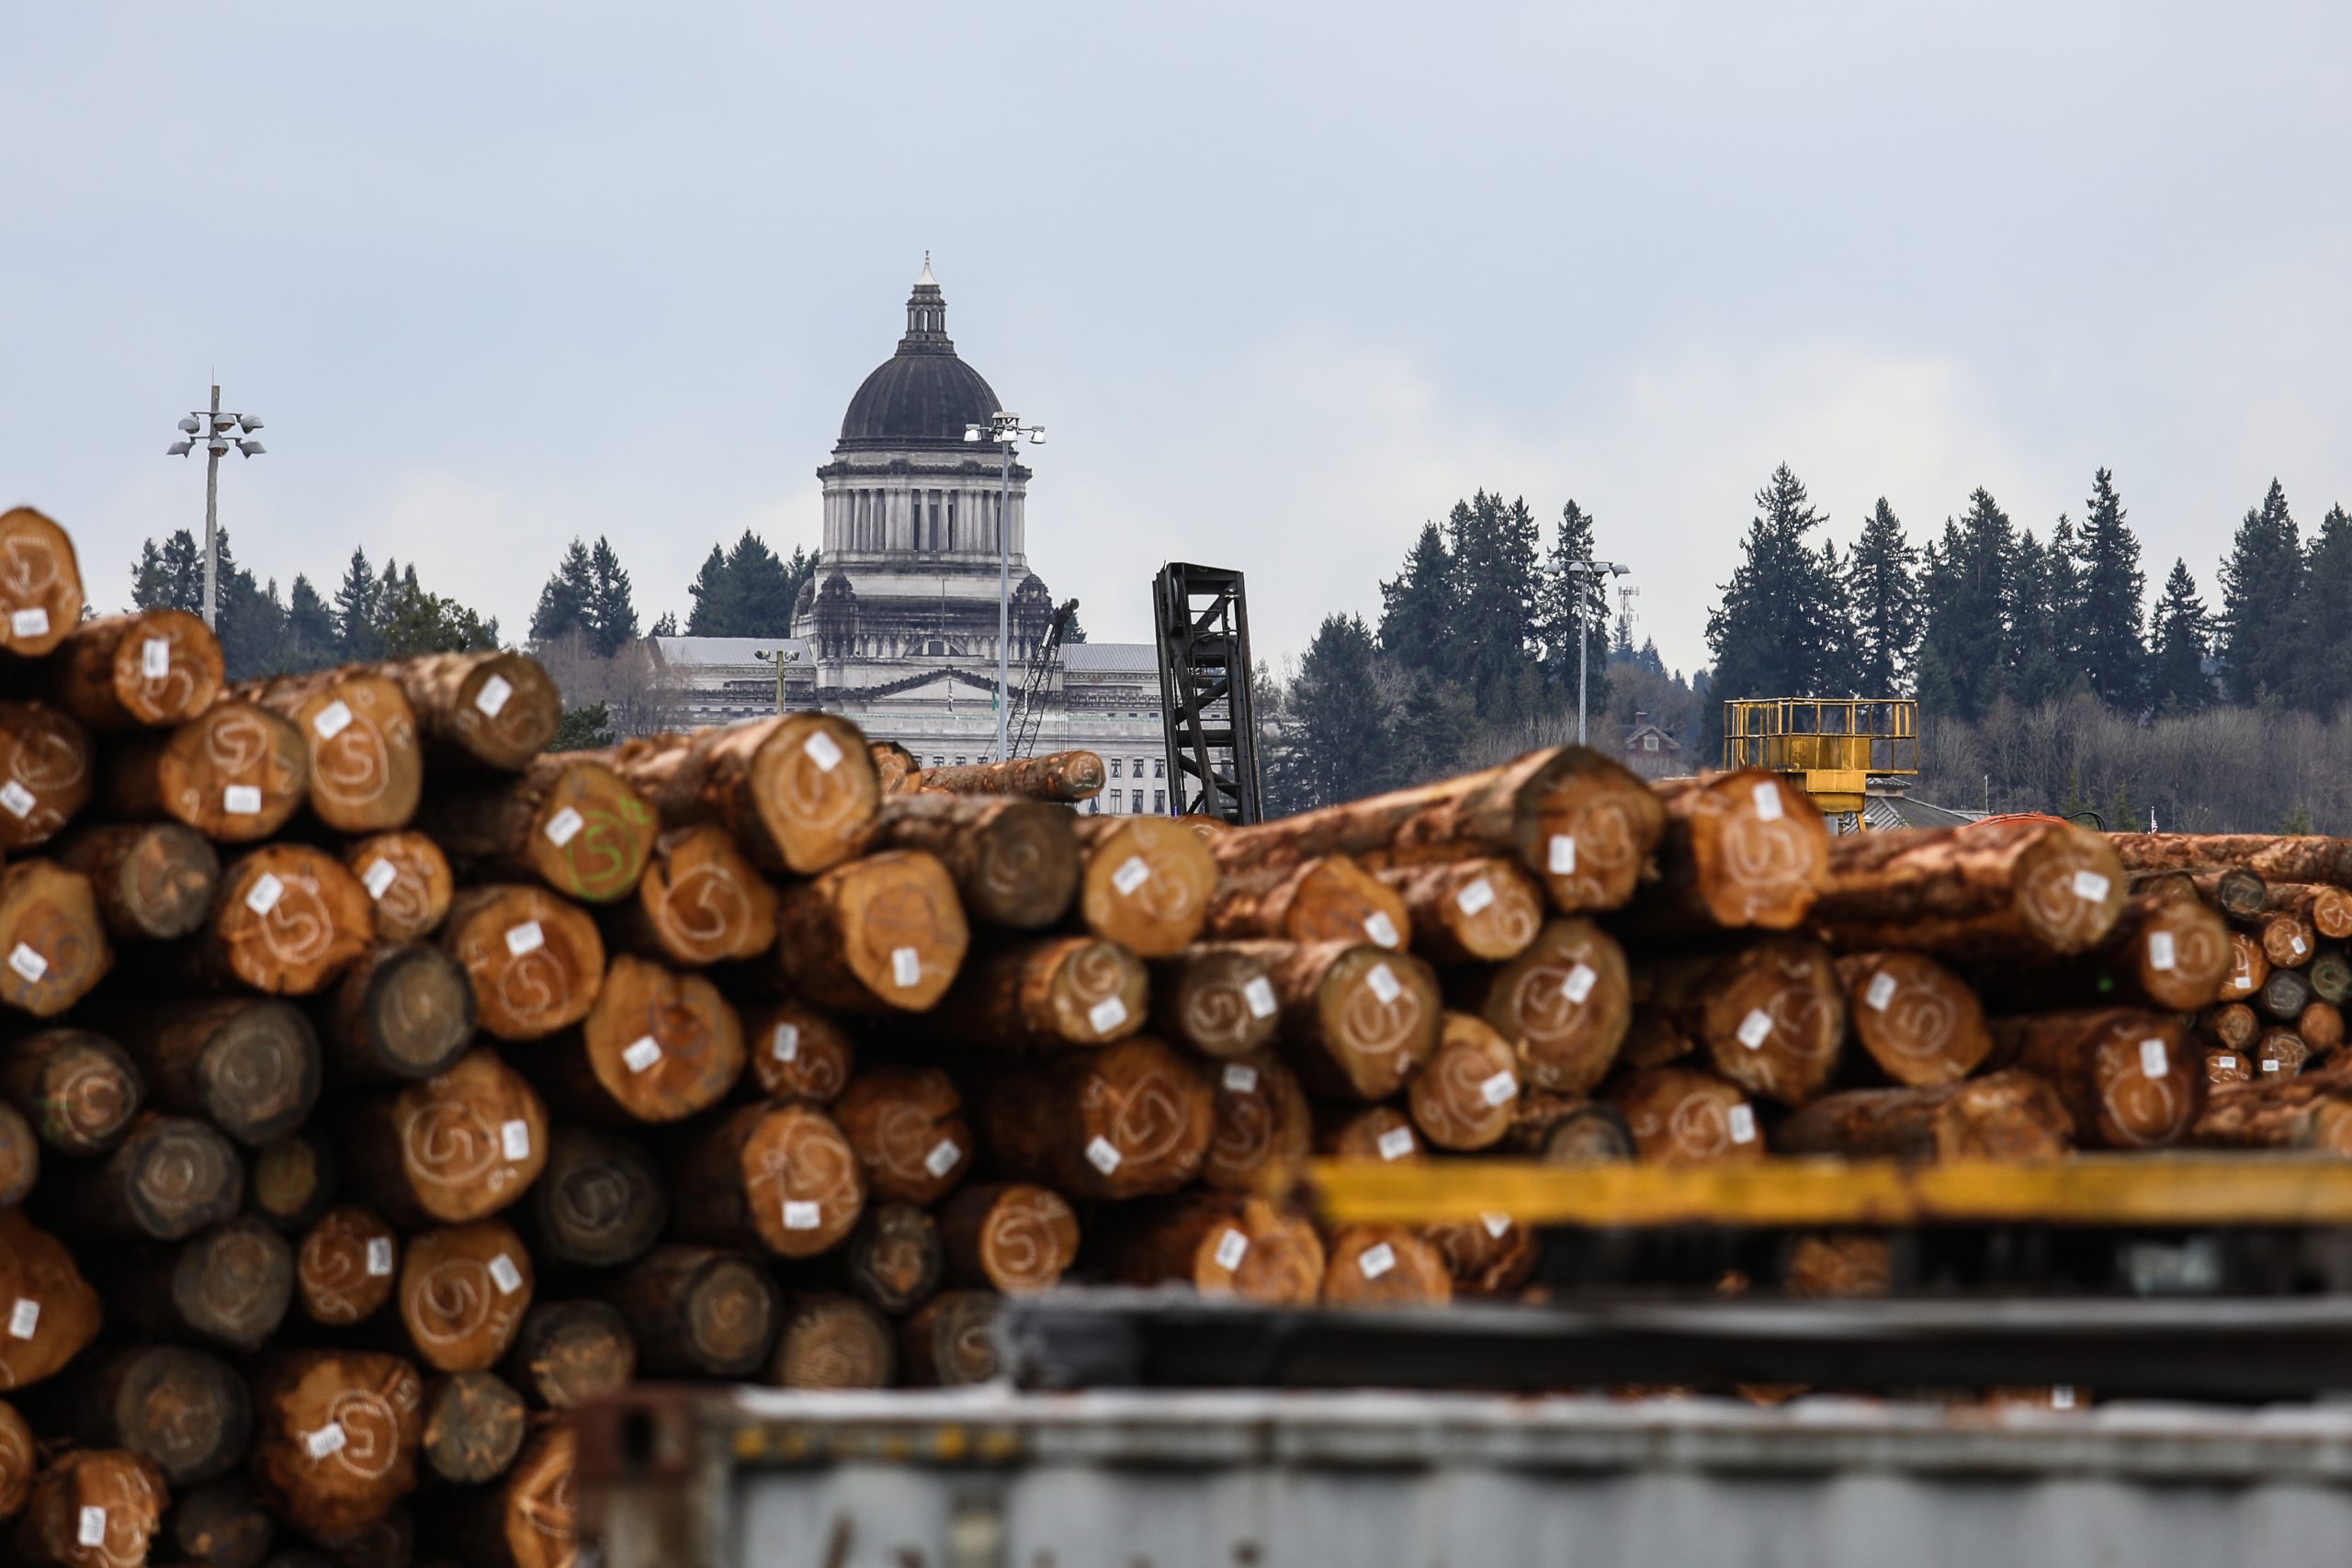 Machinists Union, Allies Win Washington State Supreme Court Case to Continue Sustainable Forest Management